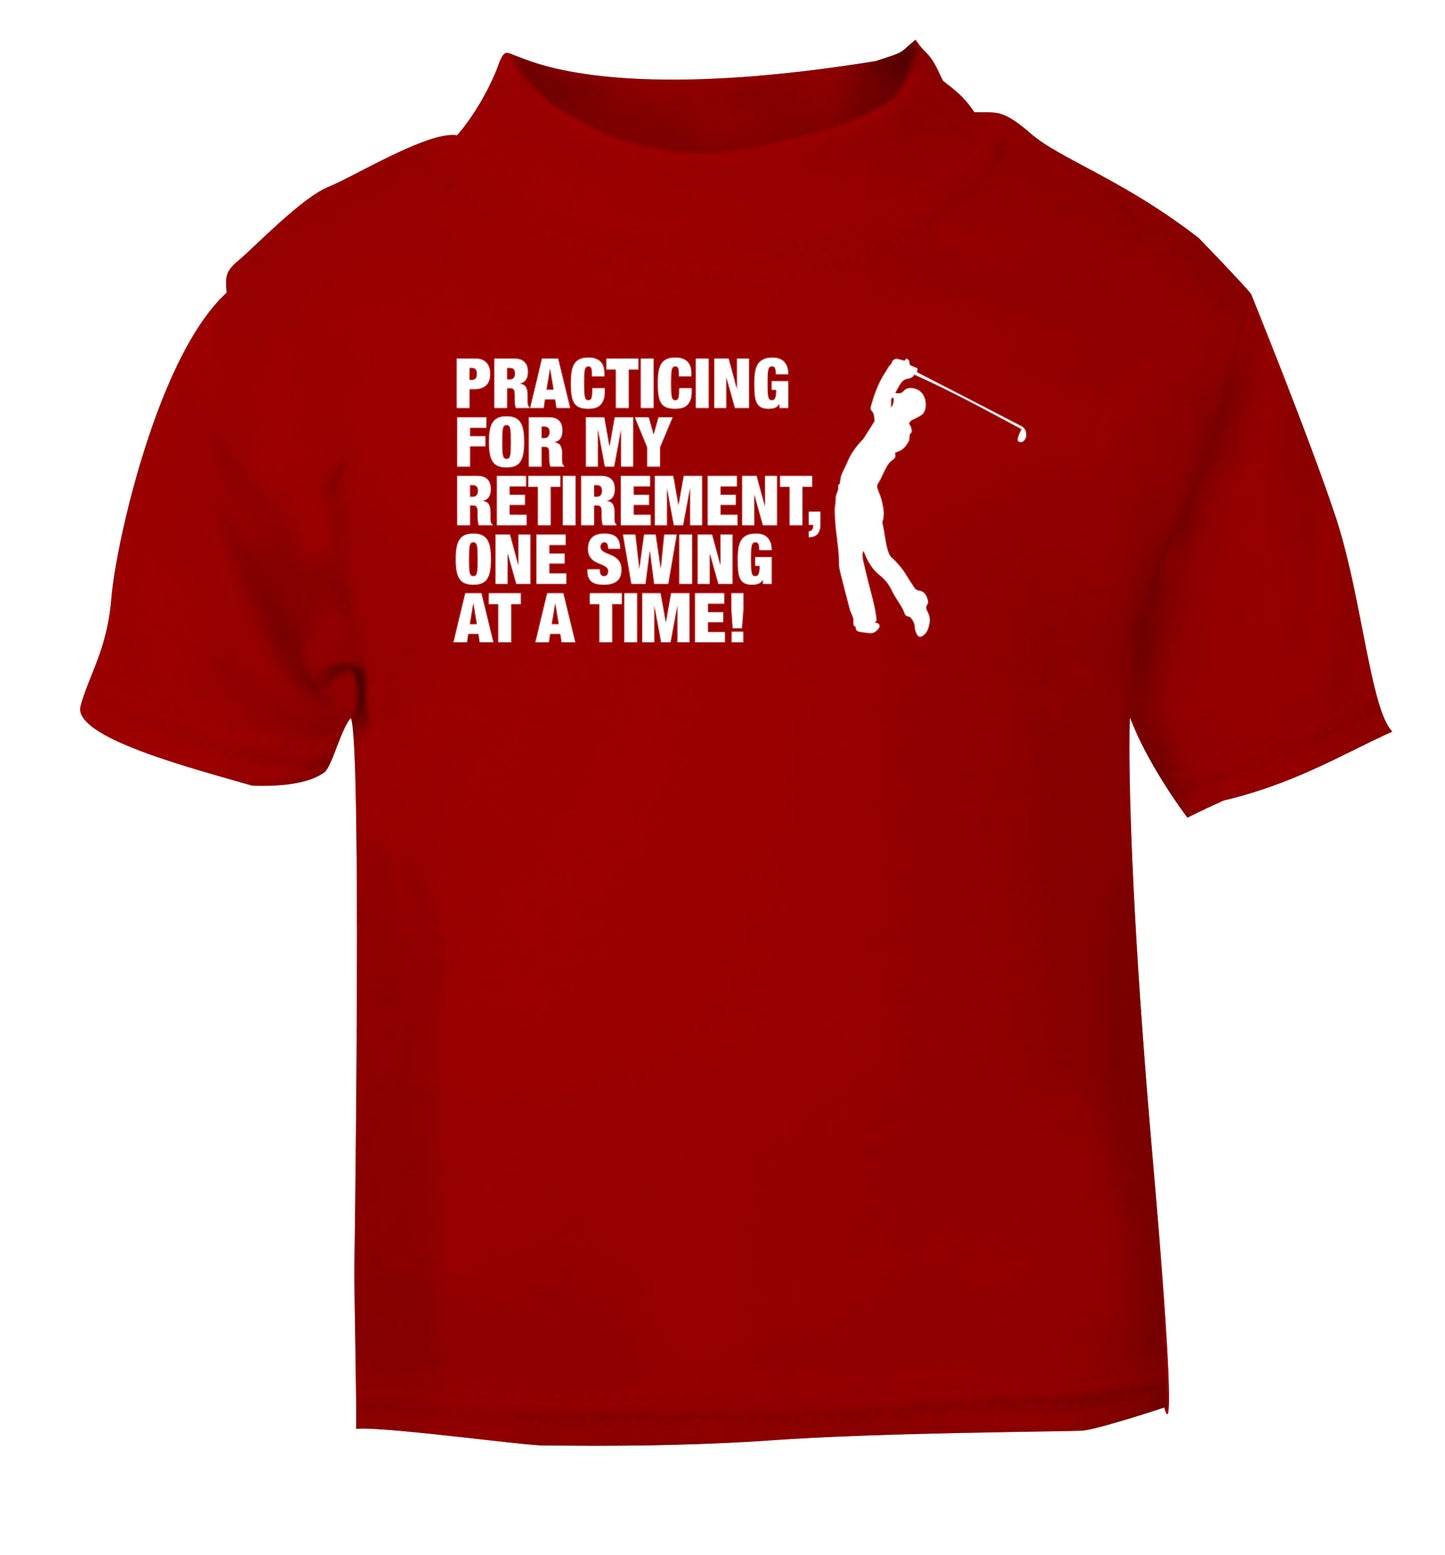 Practicing for my retirement one swing at a time red Baby Toddler Tshirt 2 Years